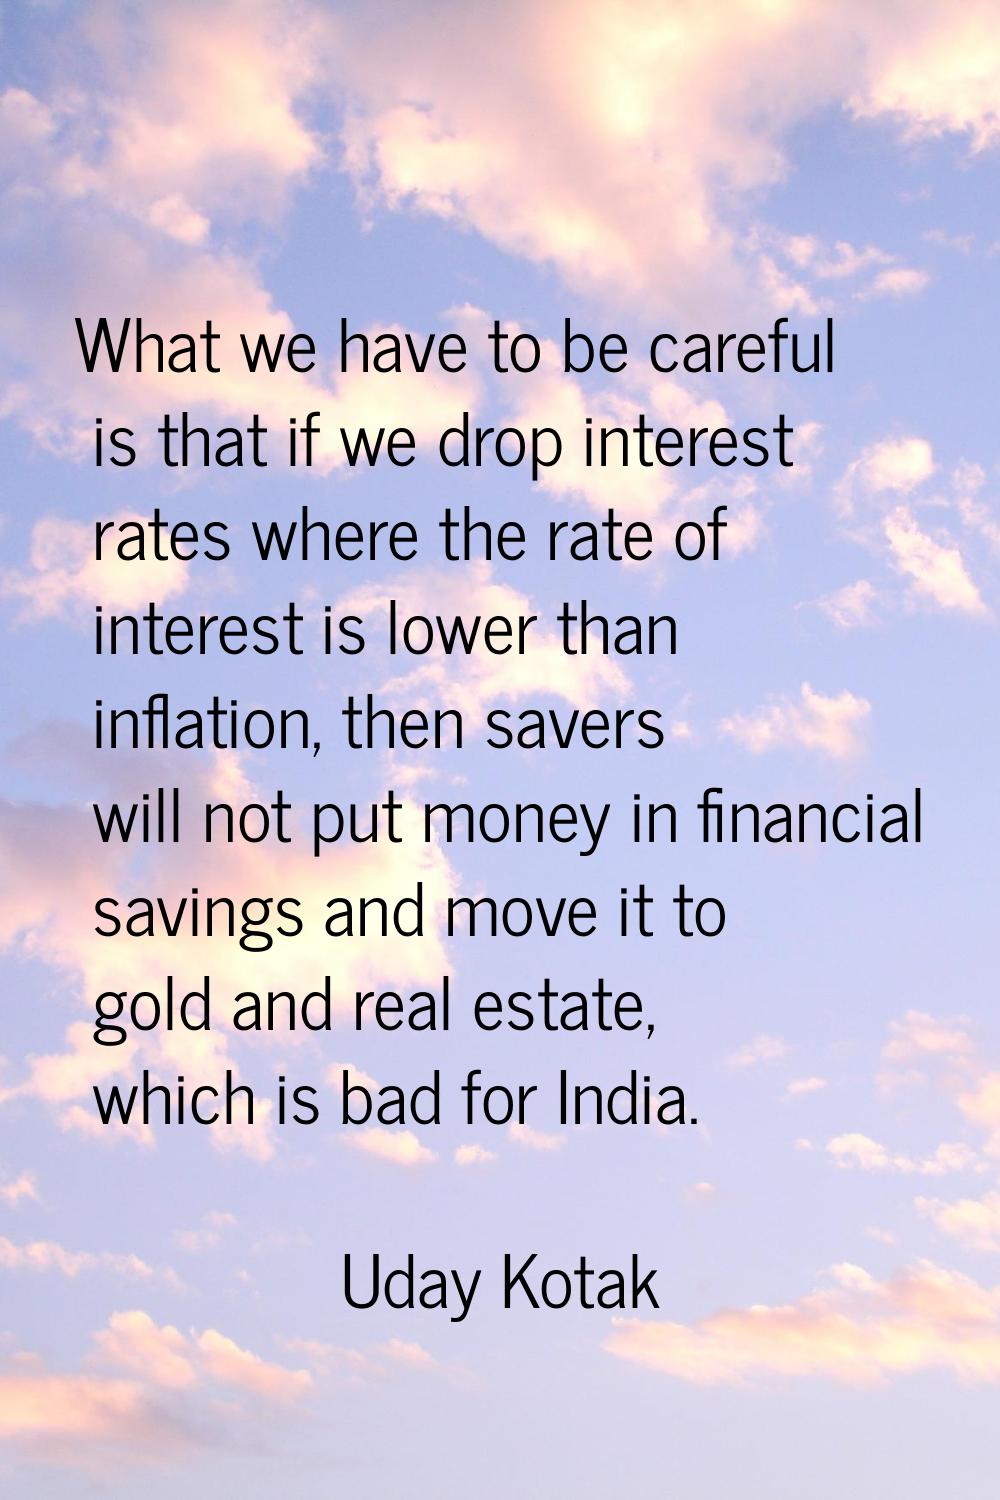 What we have to be careful is that if we drop interest rates where the rate of interest is lower th